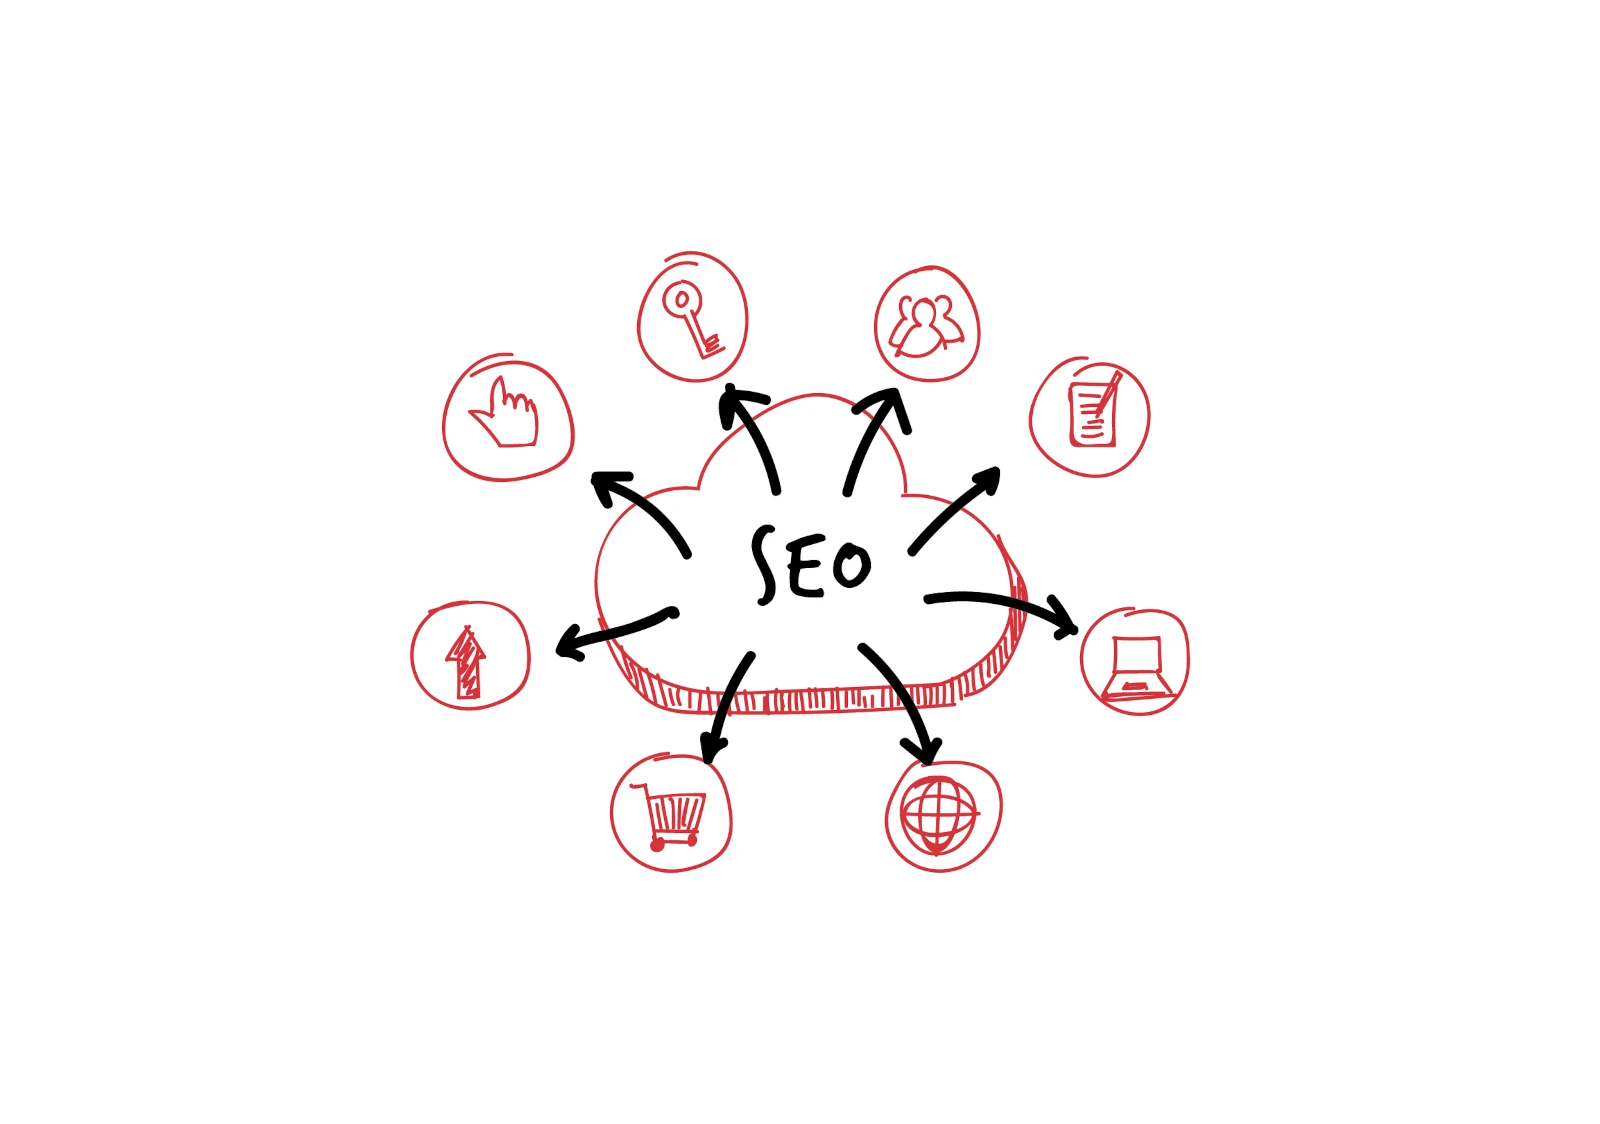 An approximate illustration of the SEO process